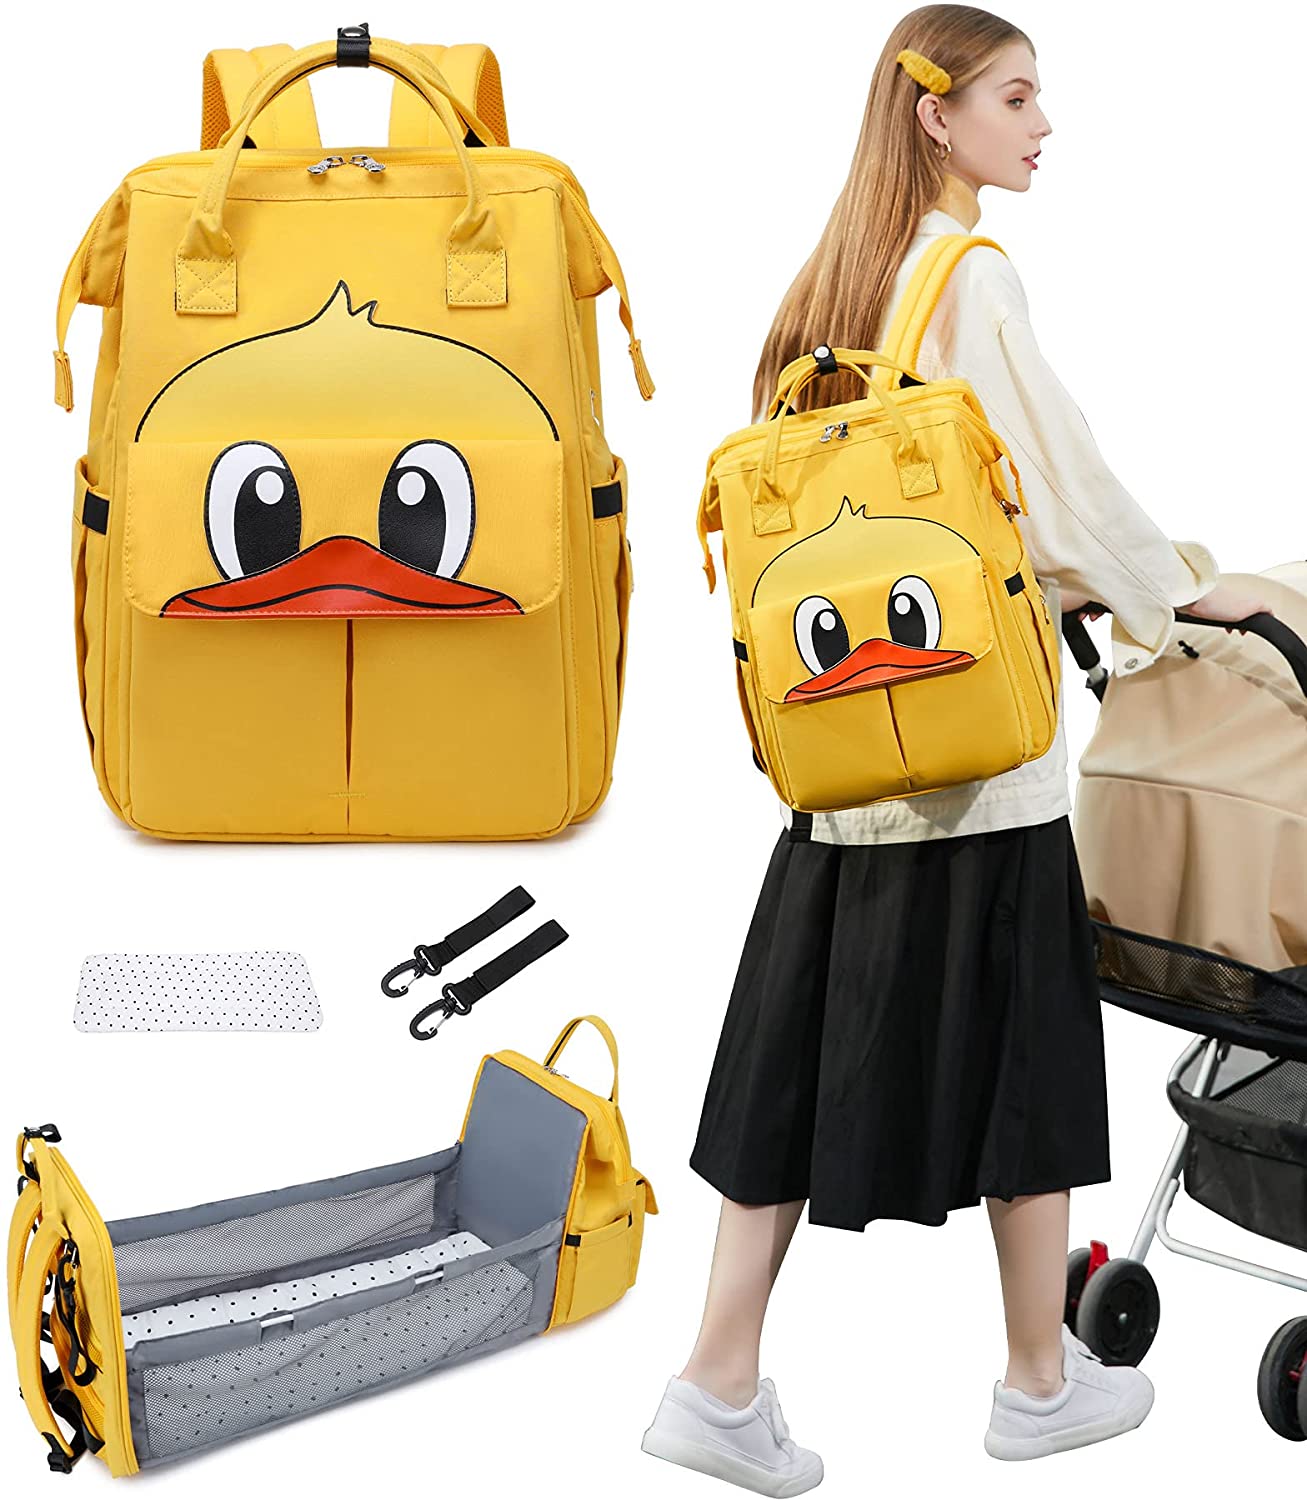 Acbags.com Diaper Bag Backpack with Changing Station, Waterproof Mommy Bag, Cute Cartoon Duck 3 in 1 Nappy Bag for, Newborn, Infan, Unisex, Toddler